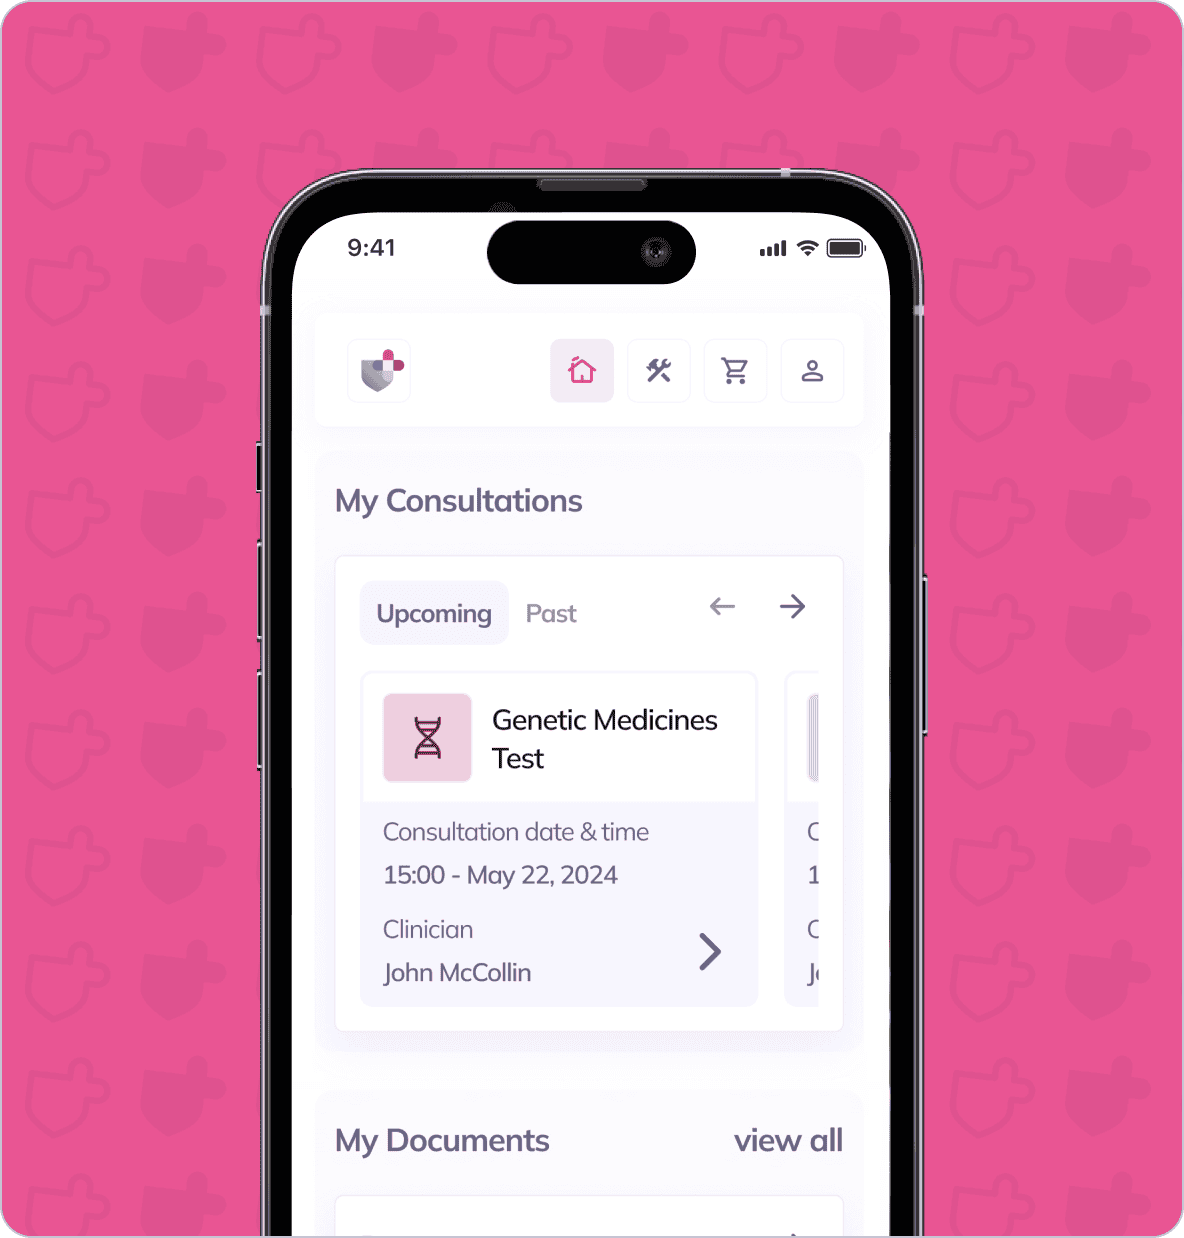 A smartphone screen displays a medical app with a "Genetic Medicines Test" consultation scheduled for May 22, 2024, under the "My Consultations" section. The background is pink with faint shield icons.